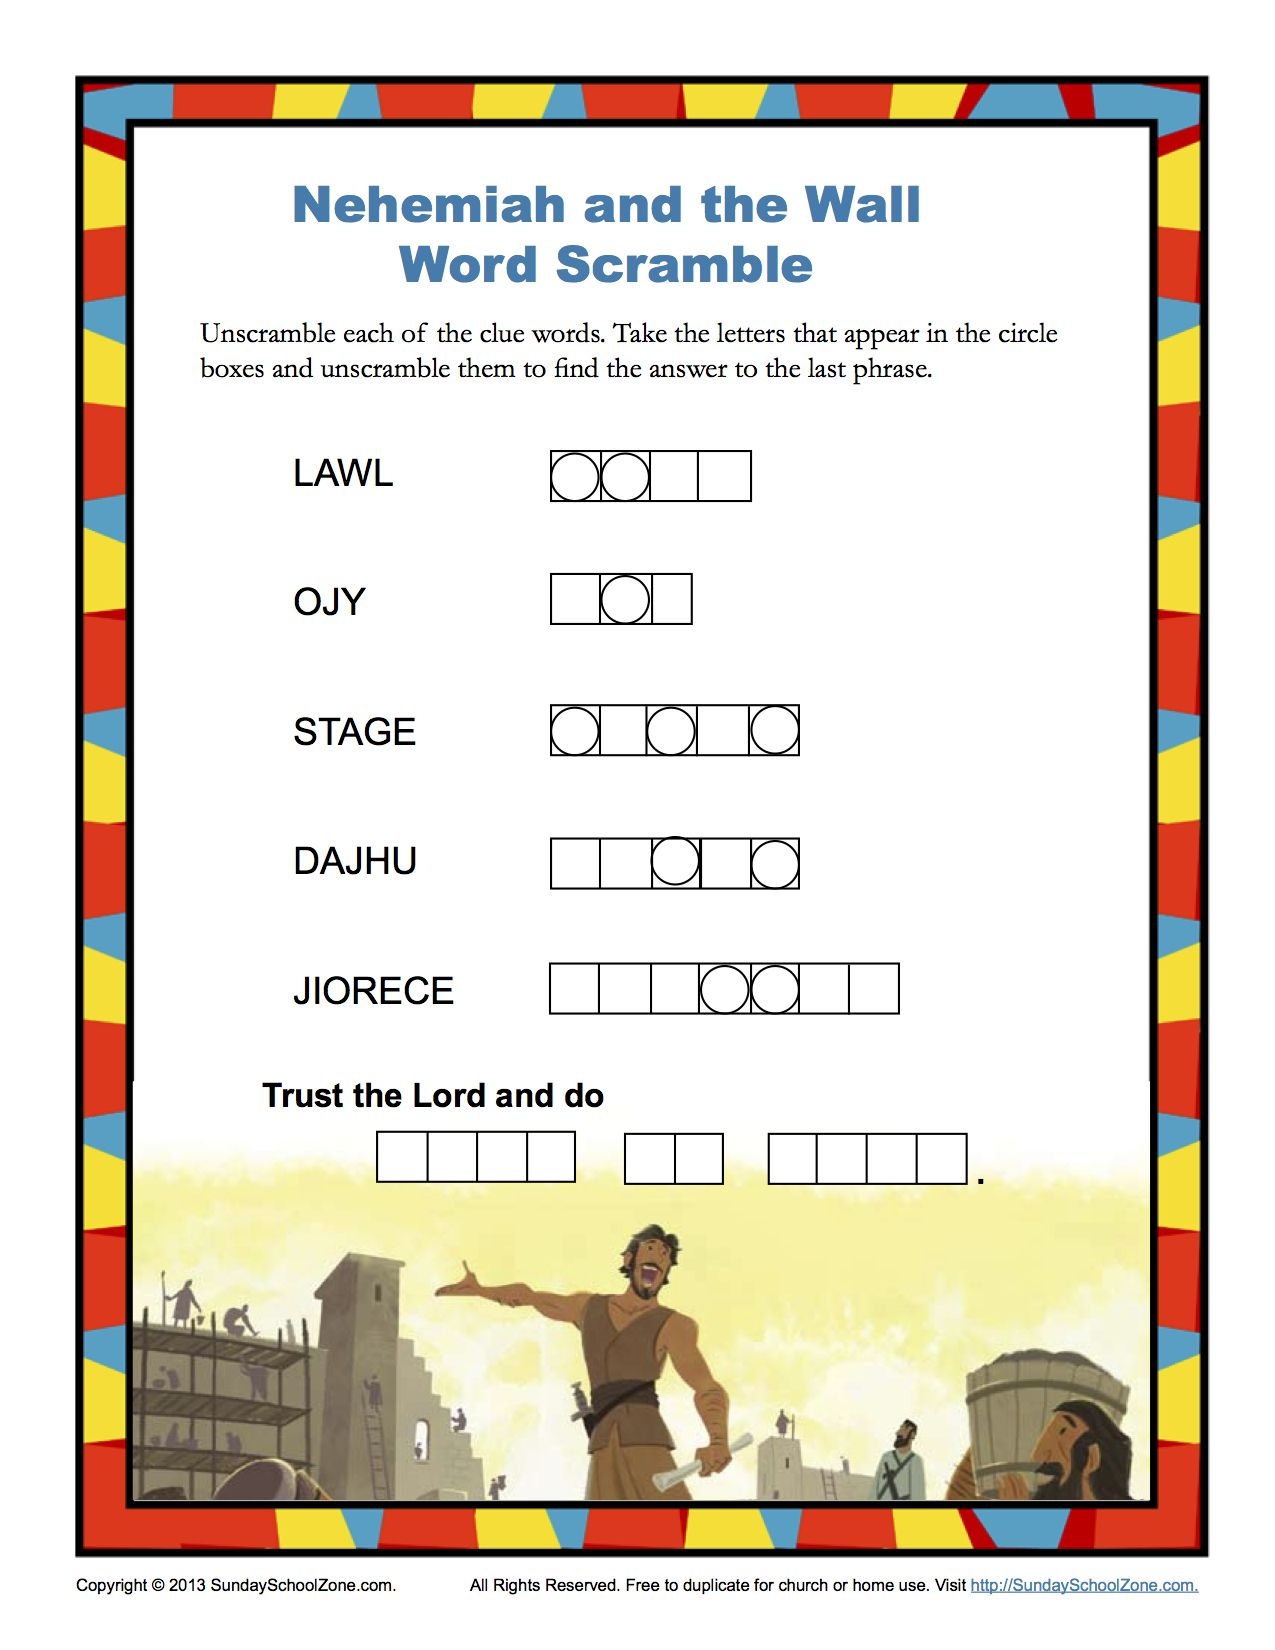 Nehemiah And The Wall Word Scramble Bible Study Lessons Bible Lessons For Kids Childrens Bible Activities